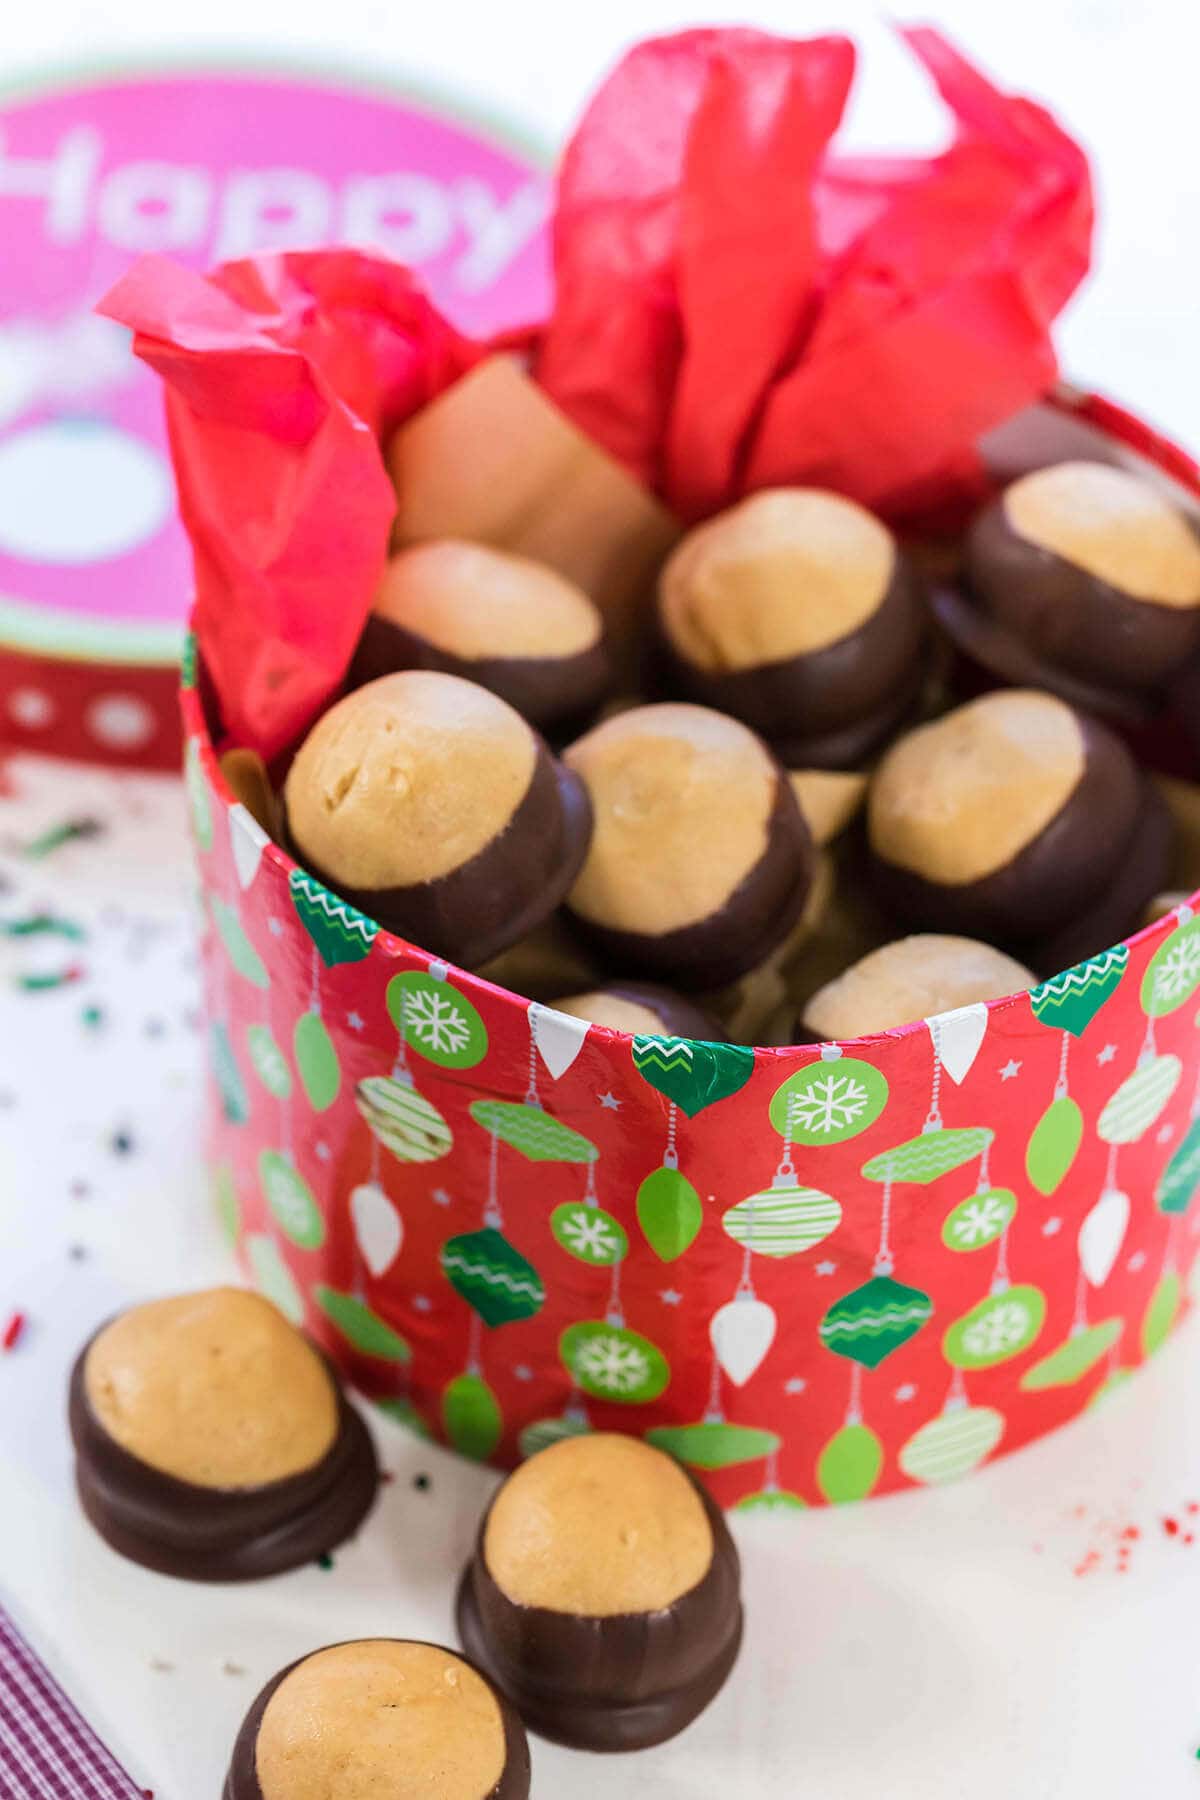 A red holiday box packed with homemade buckeye candy.